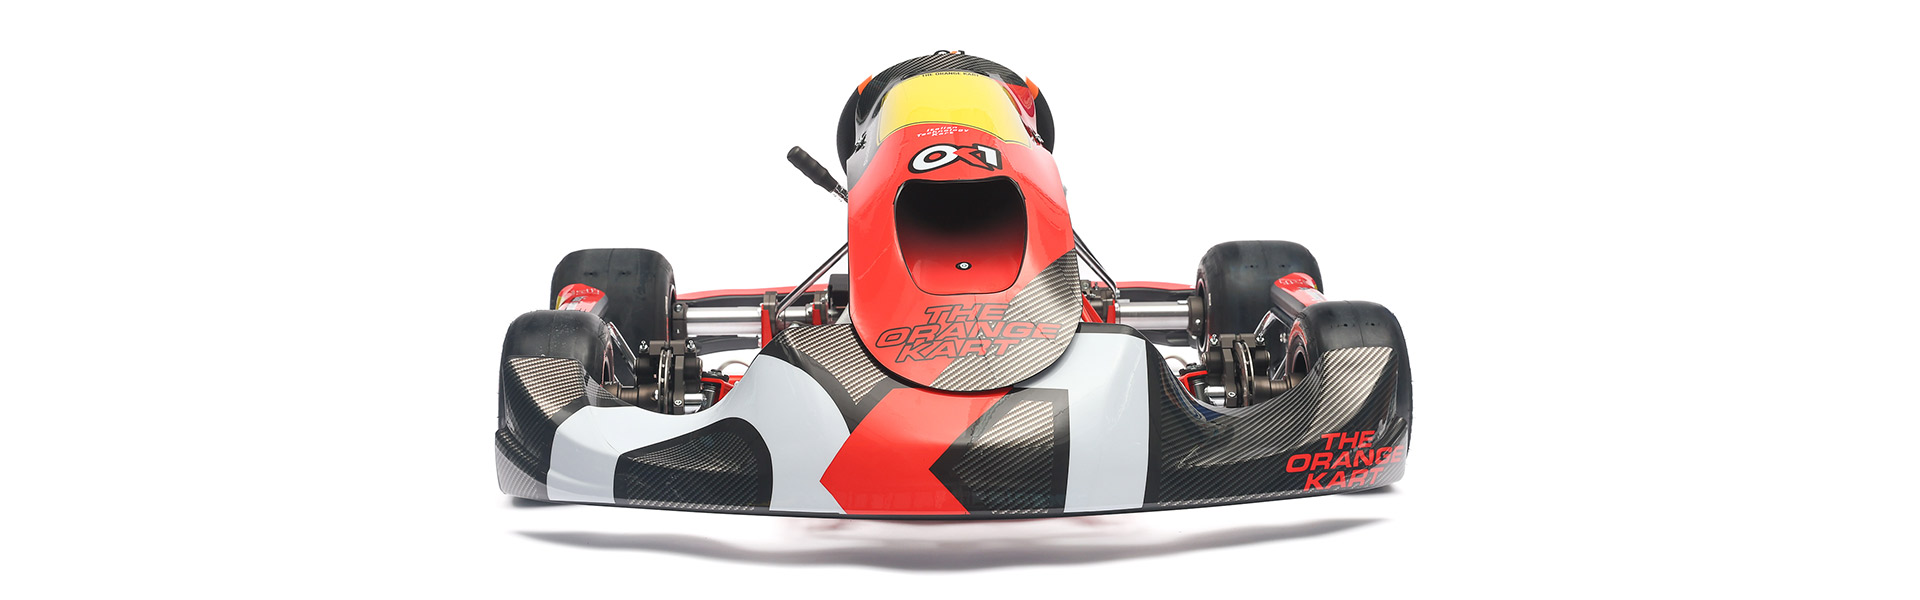 IPKarting presents the new OK1 chassis | OK1 Karts